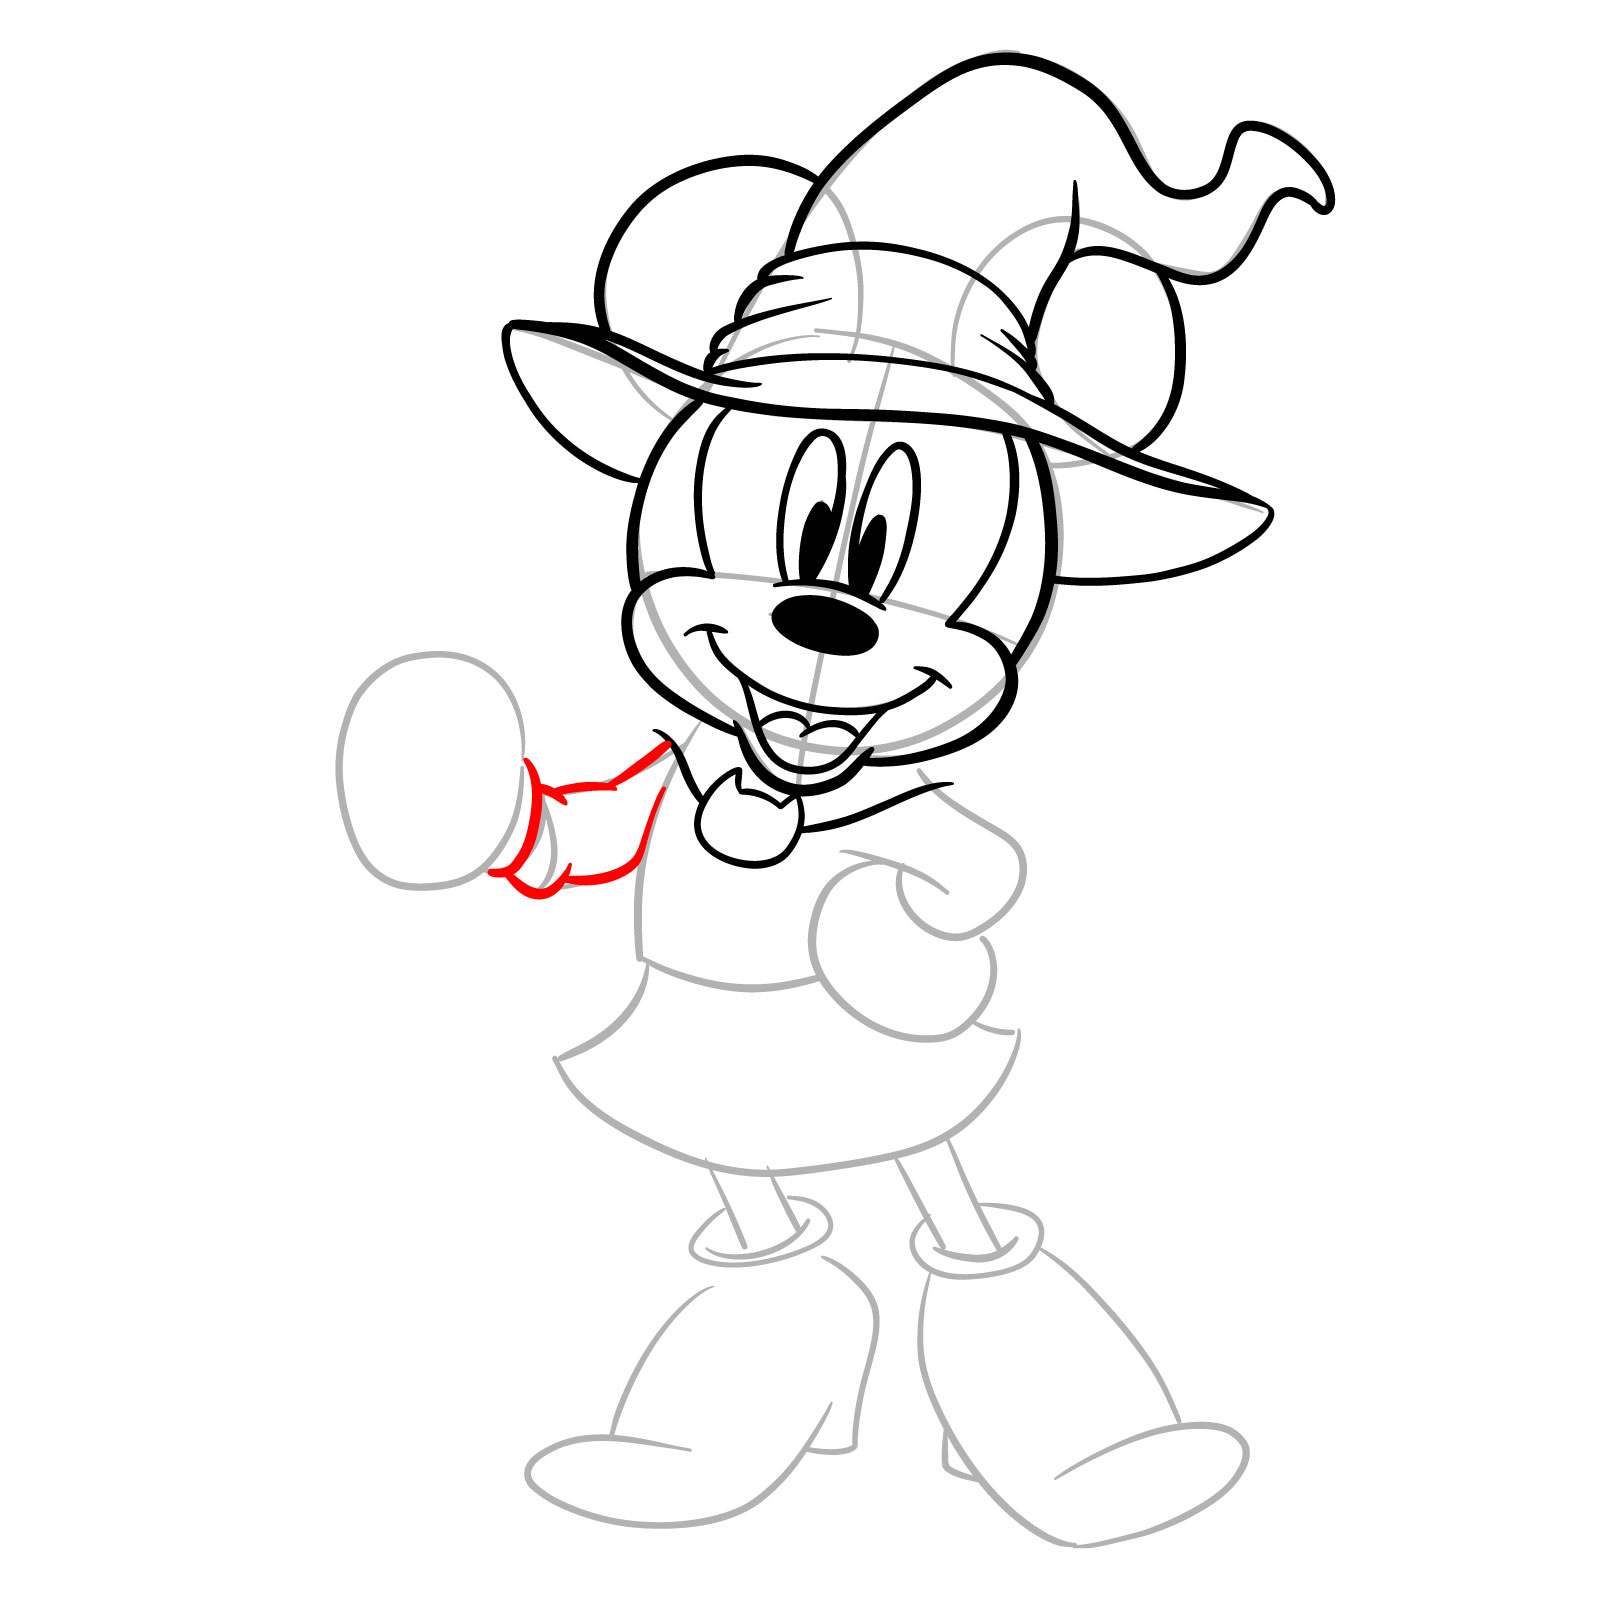 How to draw Halloween Minnie Mouse as a witch - step 14